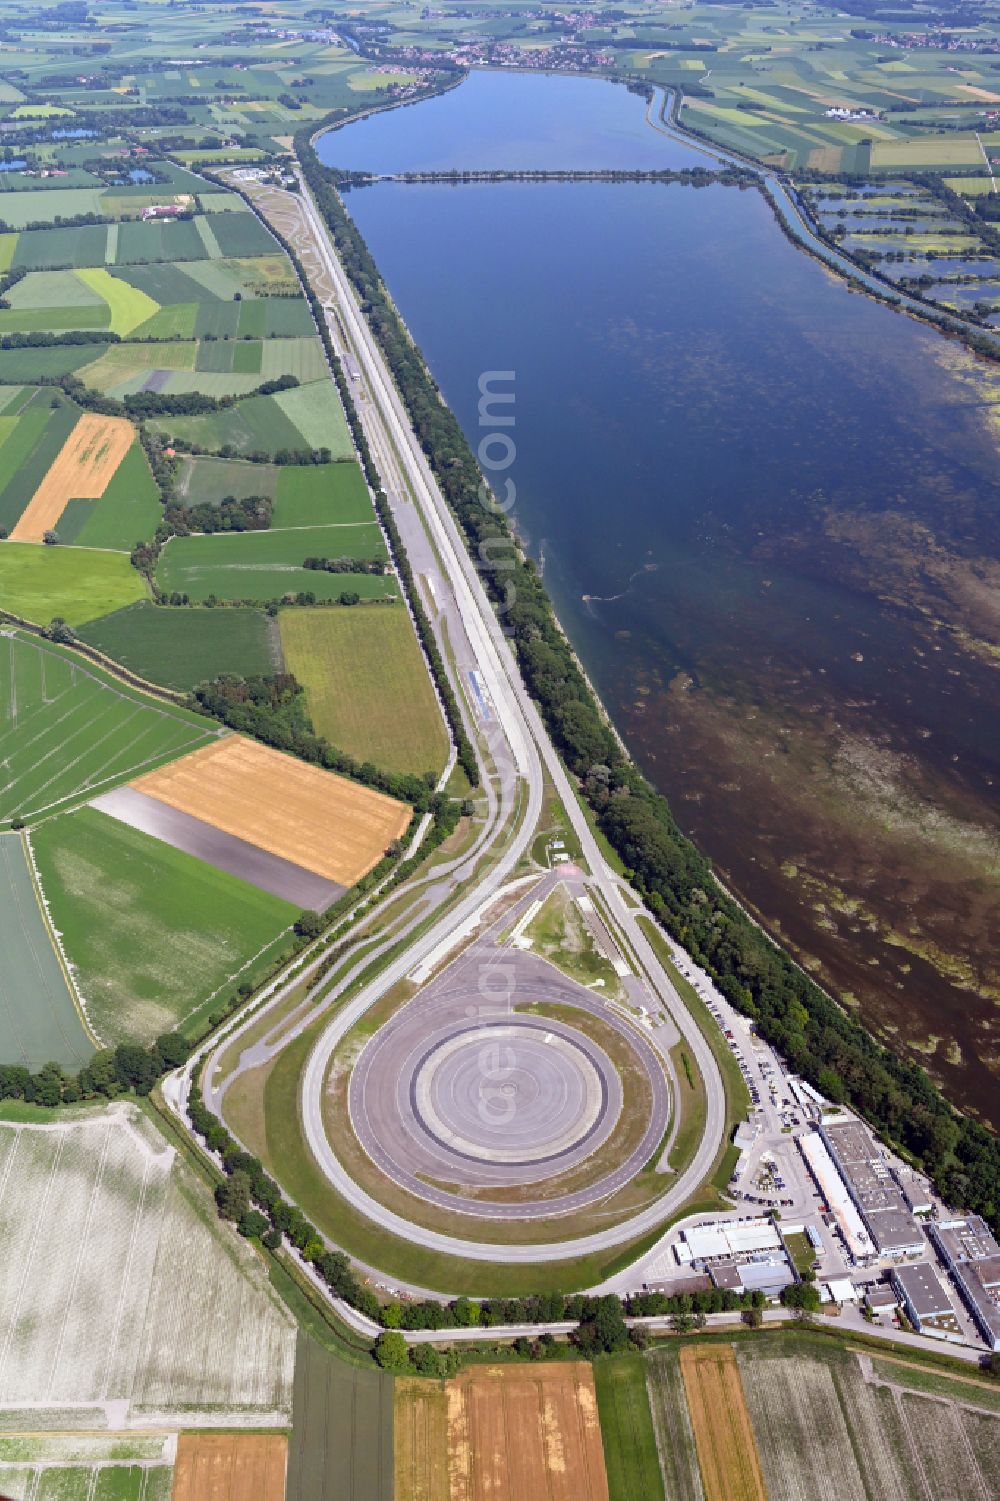 Aerial image Aschheim - Test track and practise place on the BMW measuring area Aschheim in the district on street Bayernwerkweg of Neufinsing in Aschheim in the federal state Bavaria, Germany